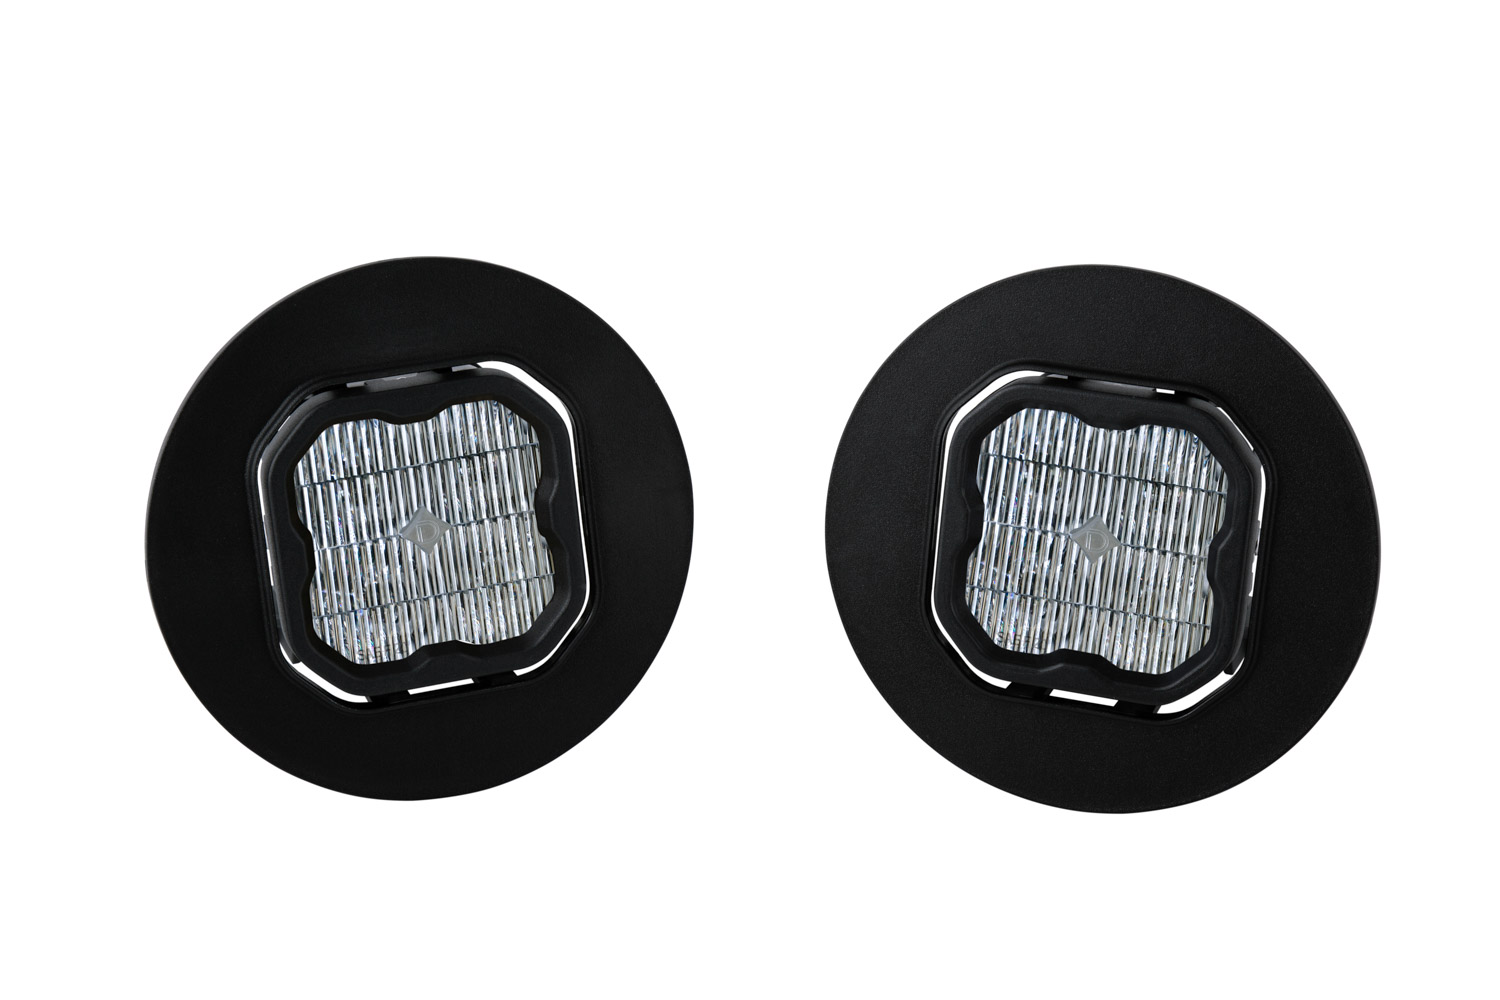 Picture of Diode Dynamics DD6665 Pod Light Featuring Advanced Tir Optics For High Efficiency And Focus.